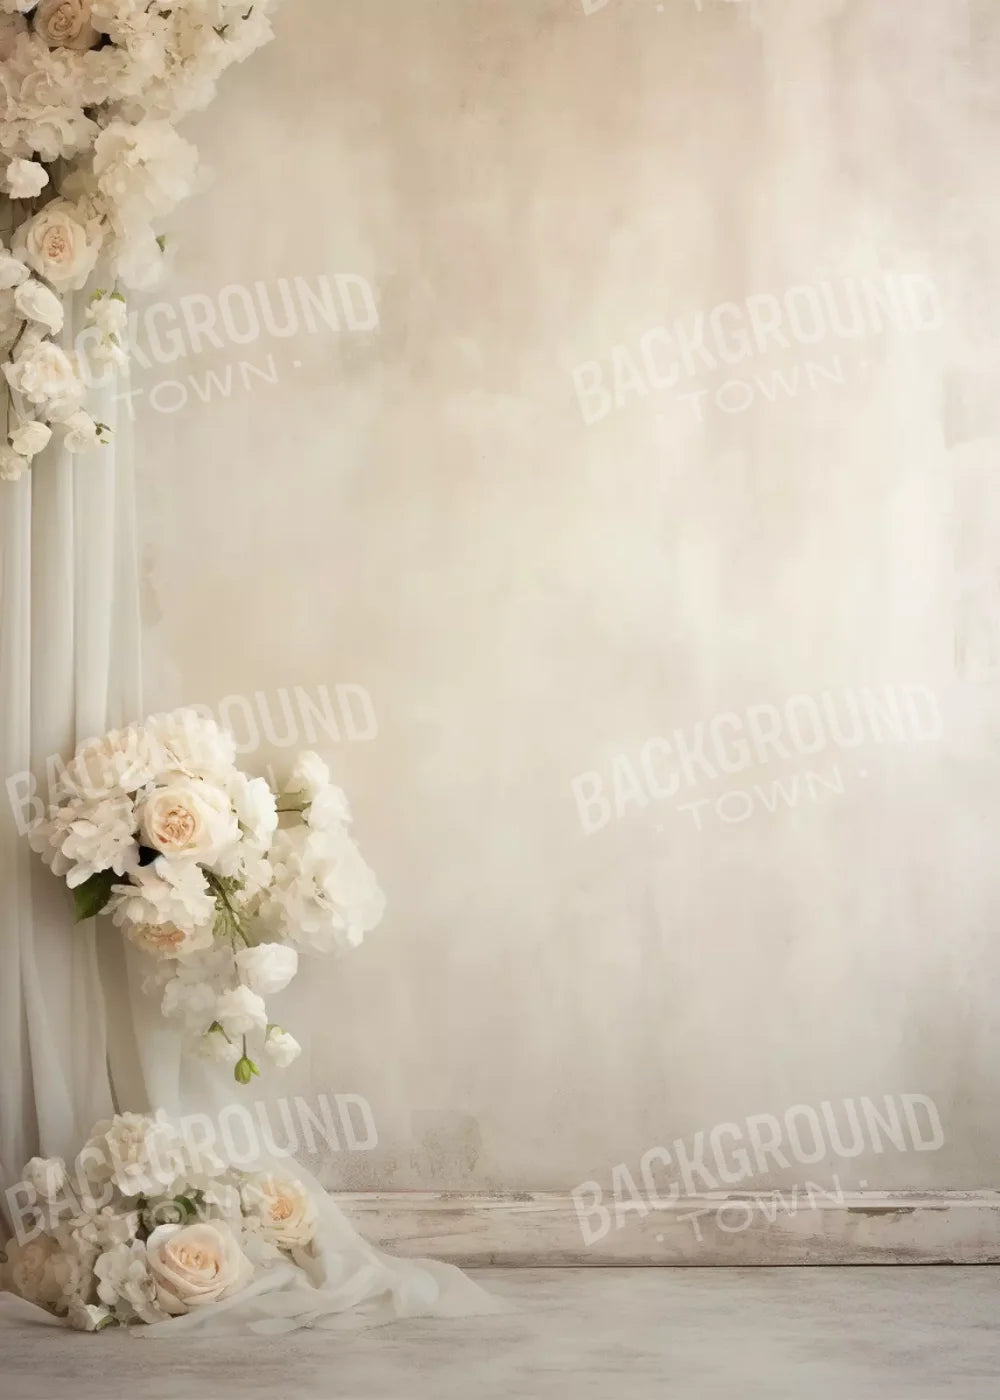 Plaster Wall With Florals 5’X7’ Ultracloth (60 X 84 Inch) Backdrop